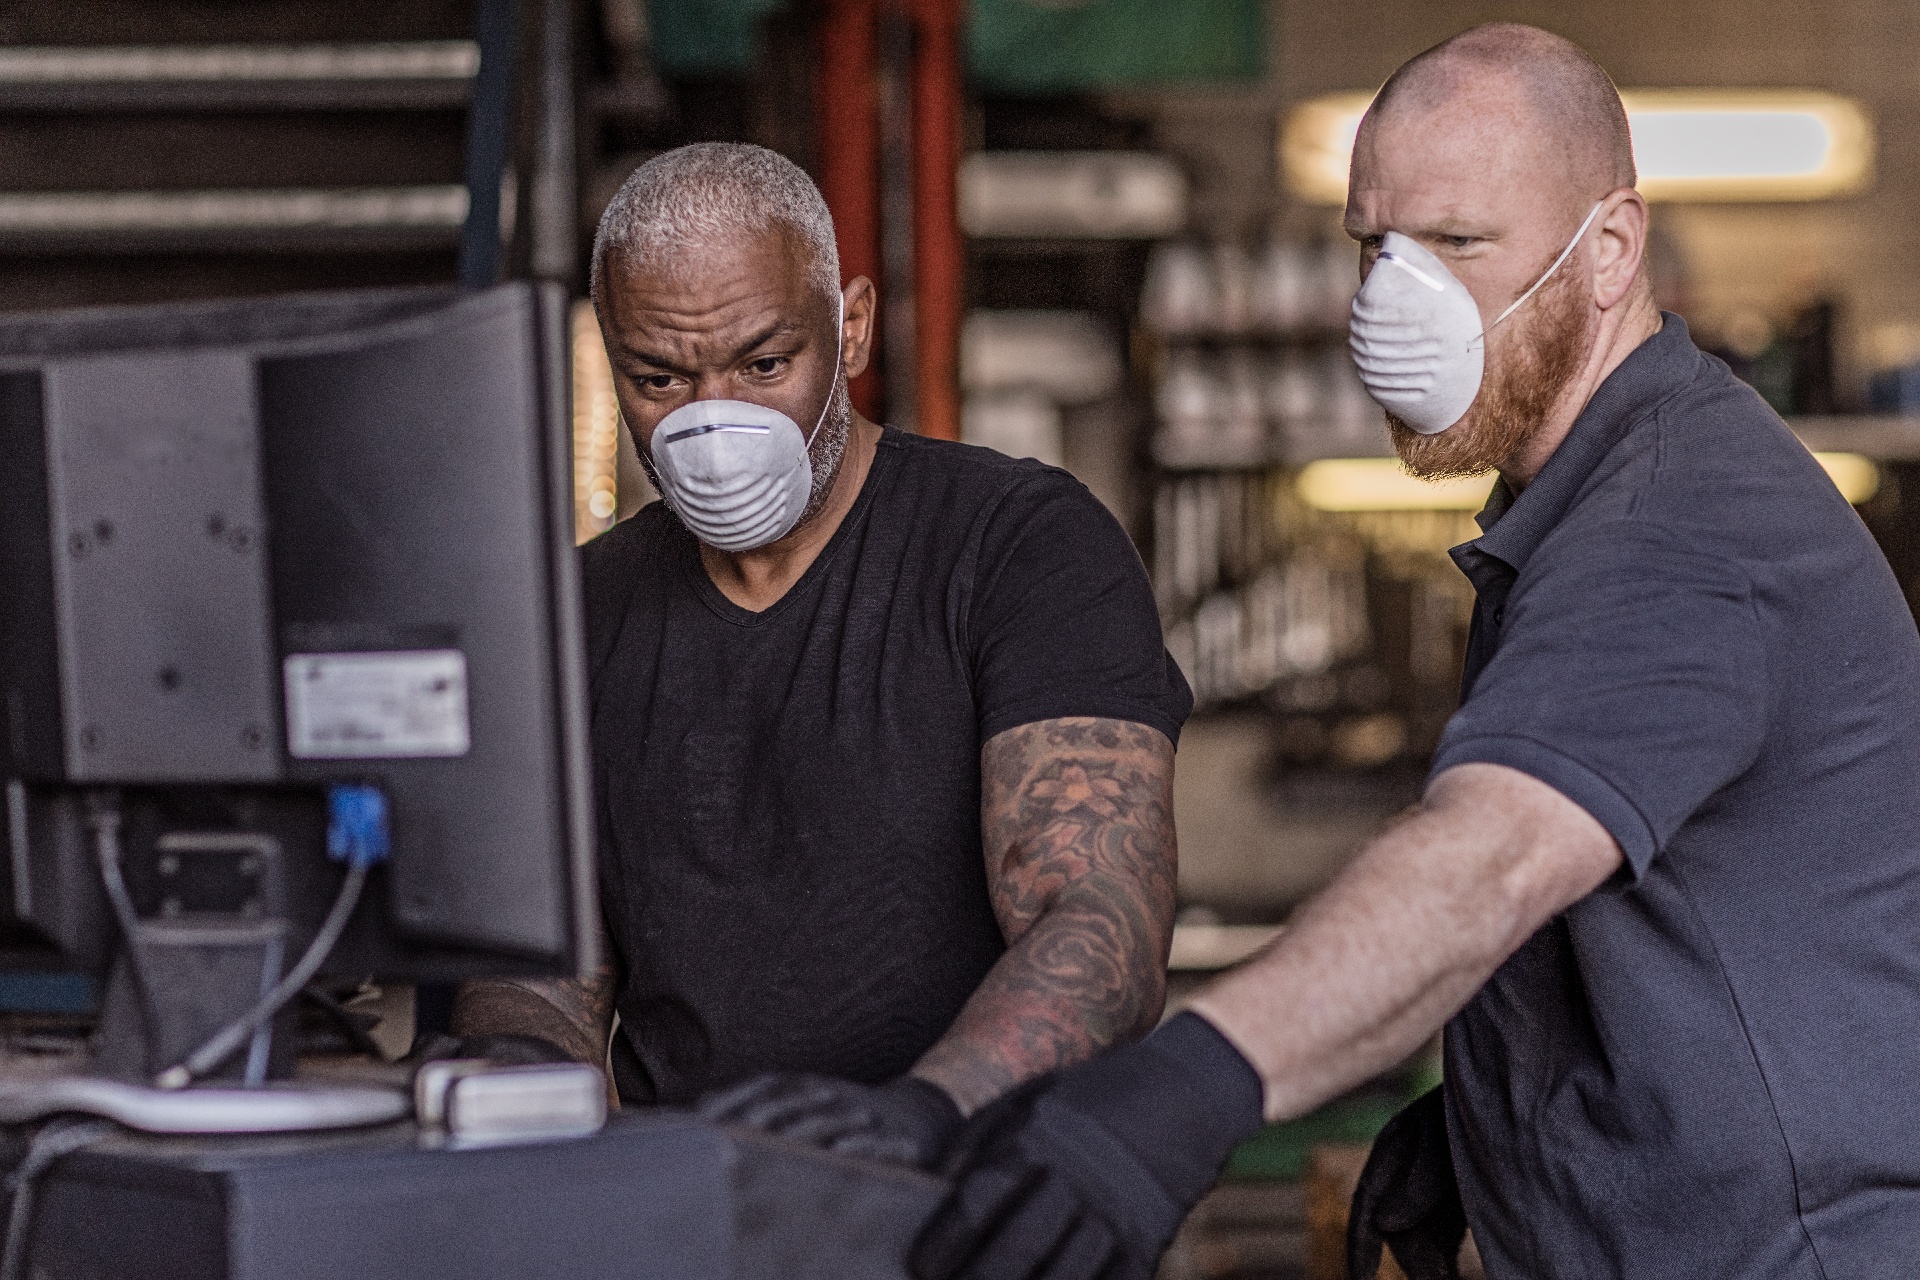 Two essential employees wearing masks at work